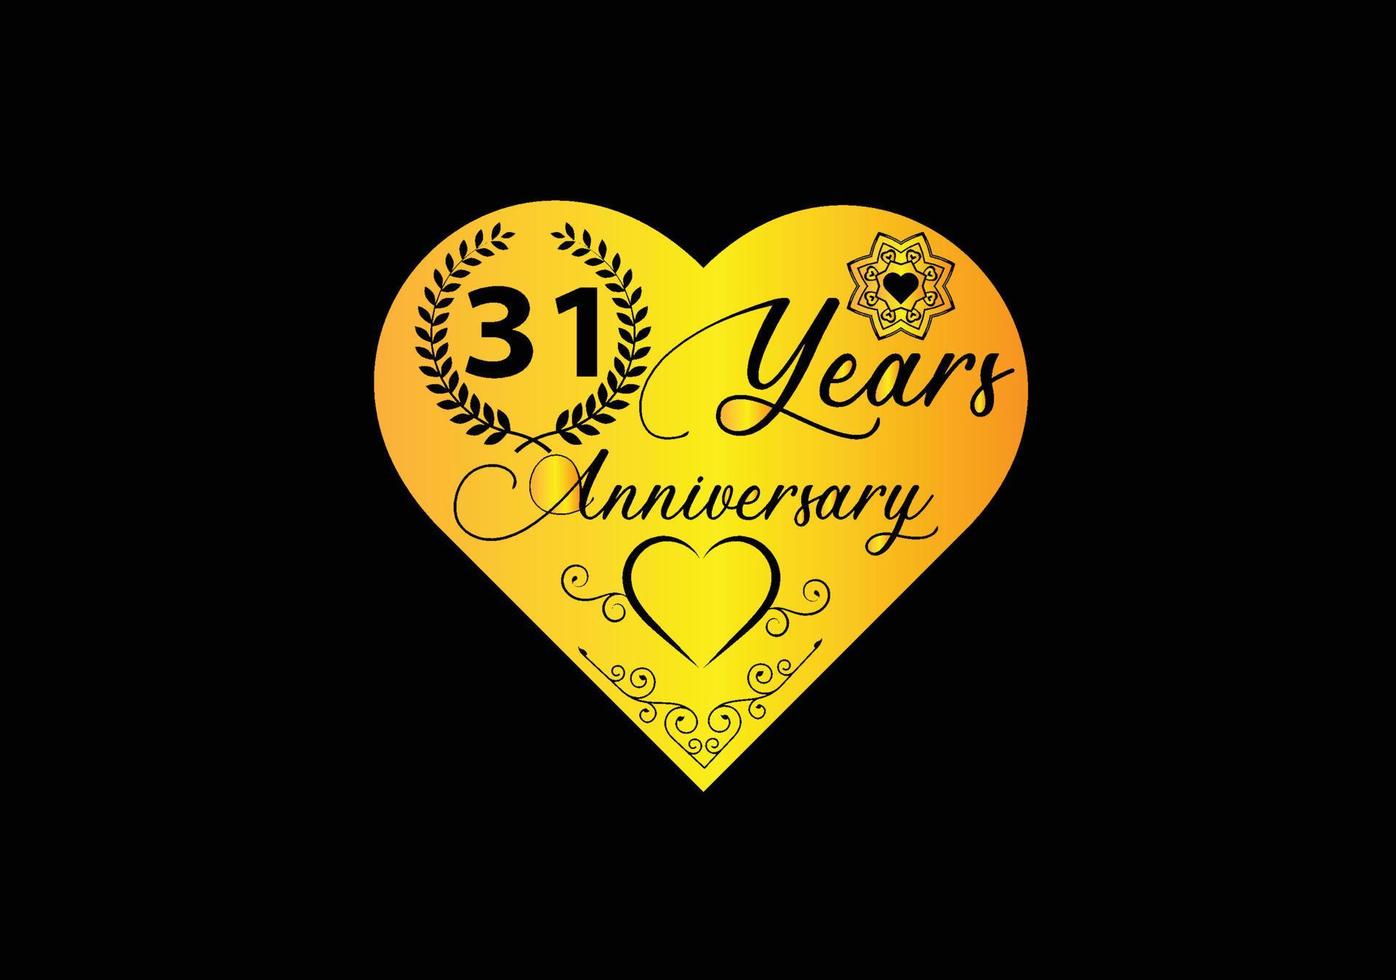 31 years anniversary celebration with love logo and icon design vector